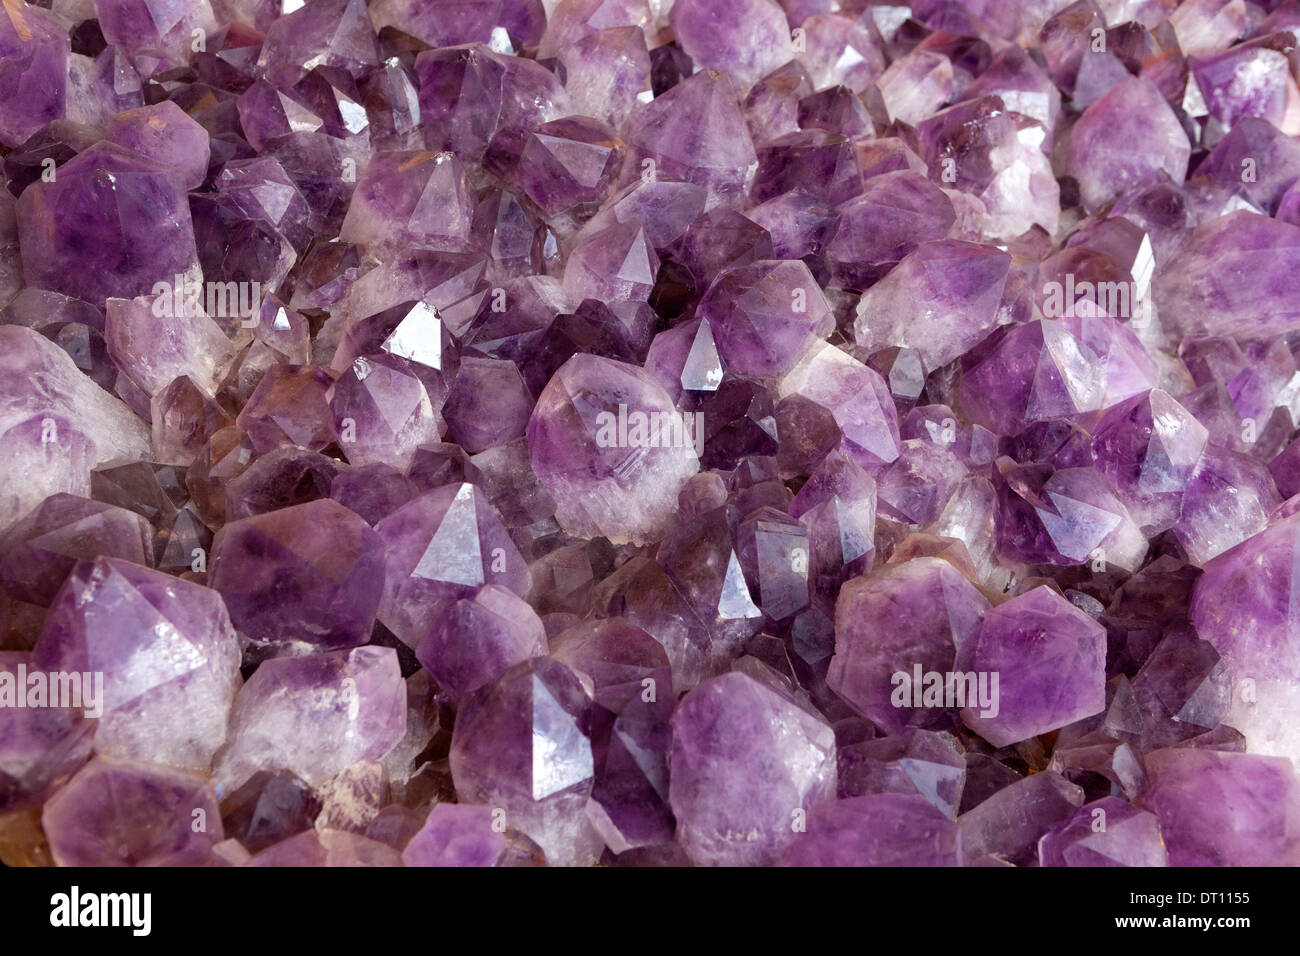 Amethyst is a violet variety of quartz often used in jewelry. Stock Photo